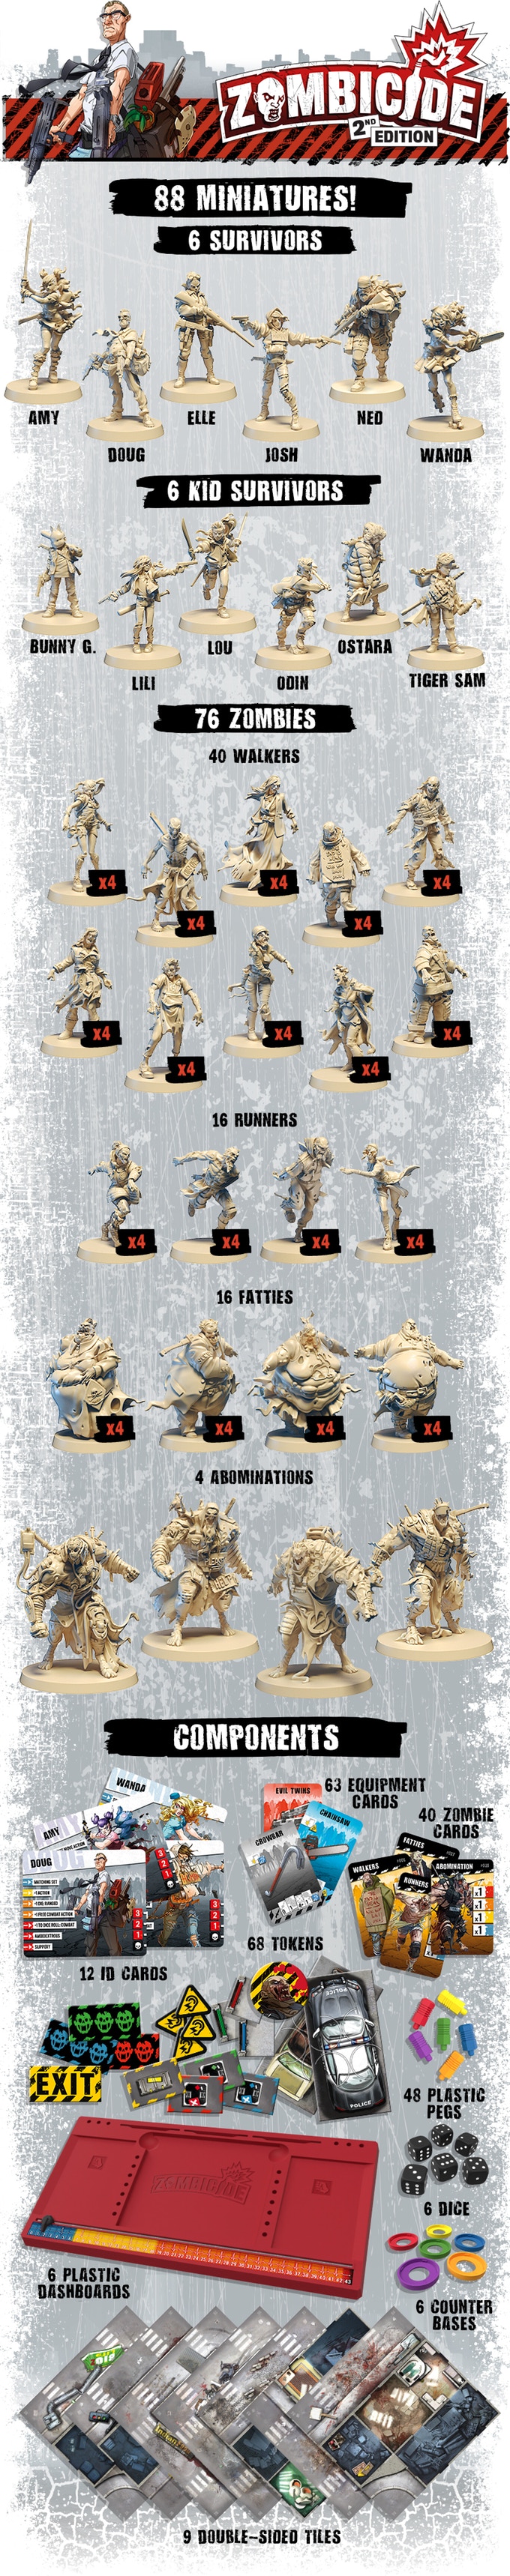 ZOMBIES & COMPANIONS UPGRADE KIT Pre-Order 2ND EDITION ZOMBICIDE 